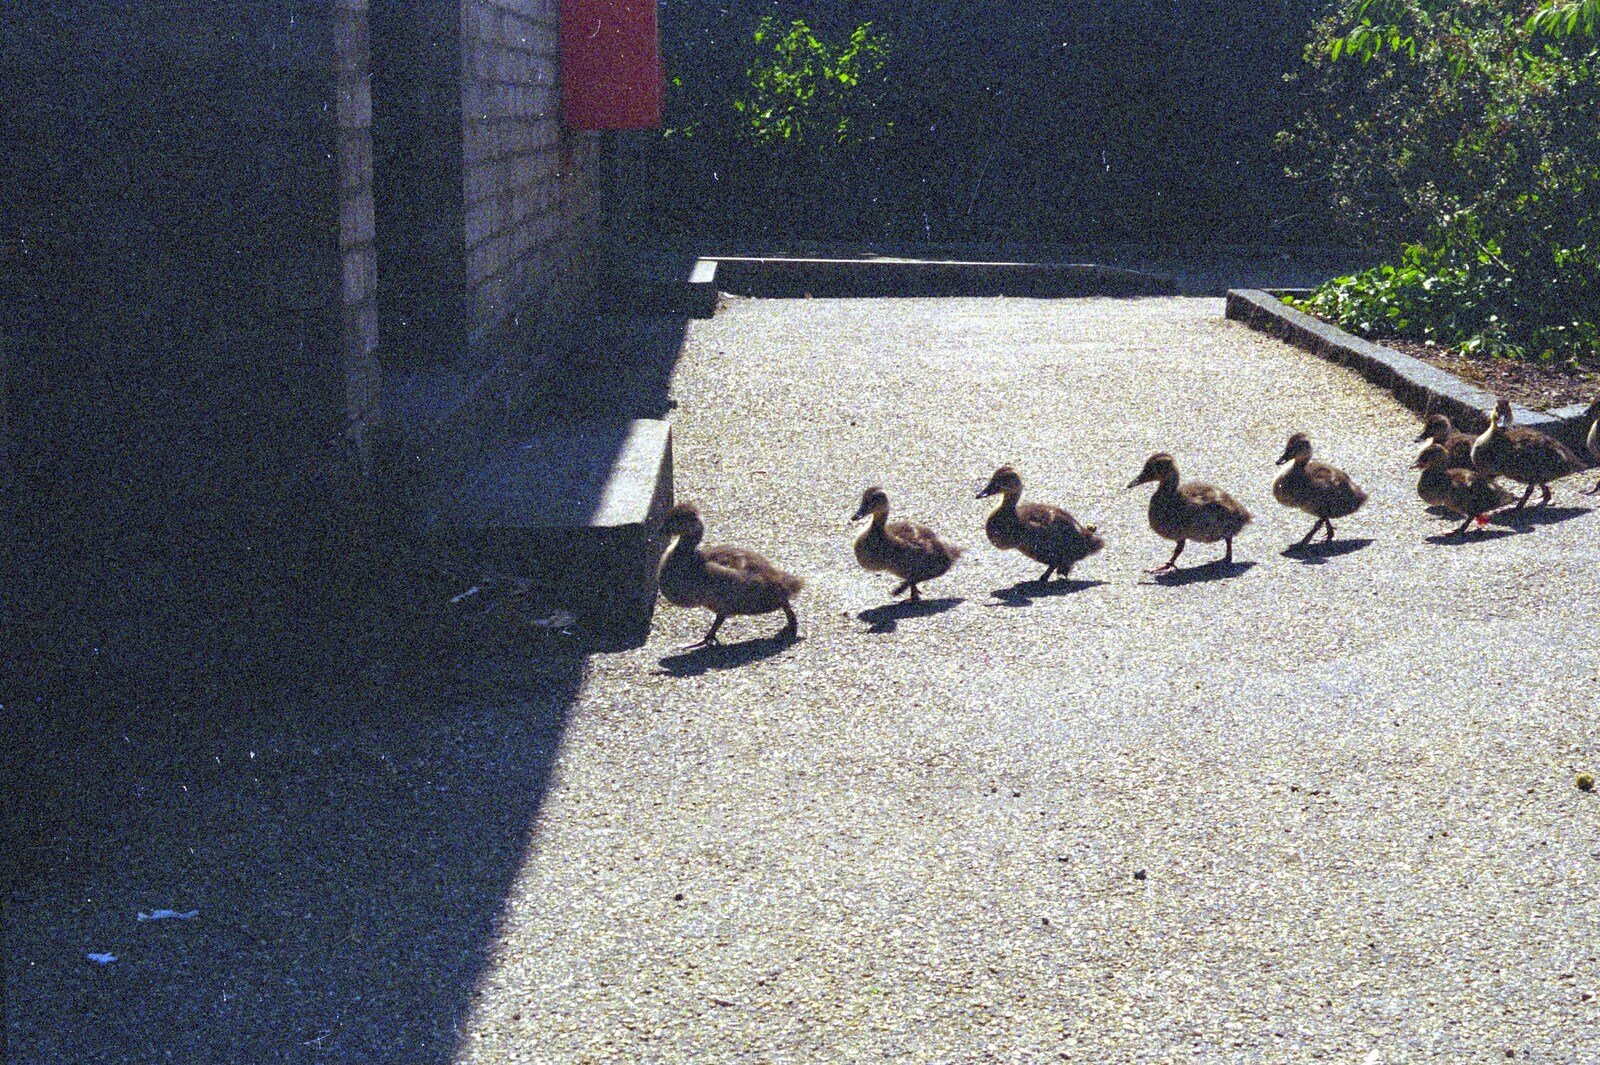 Grandmother, Neil and Caroline Visit, Brome and Orford, Suffolk - 24th July 1995: A line of ducklings crosses a path somewhere